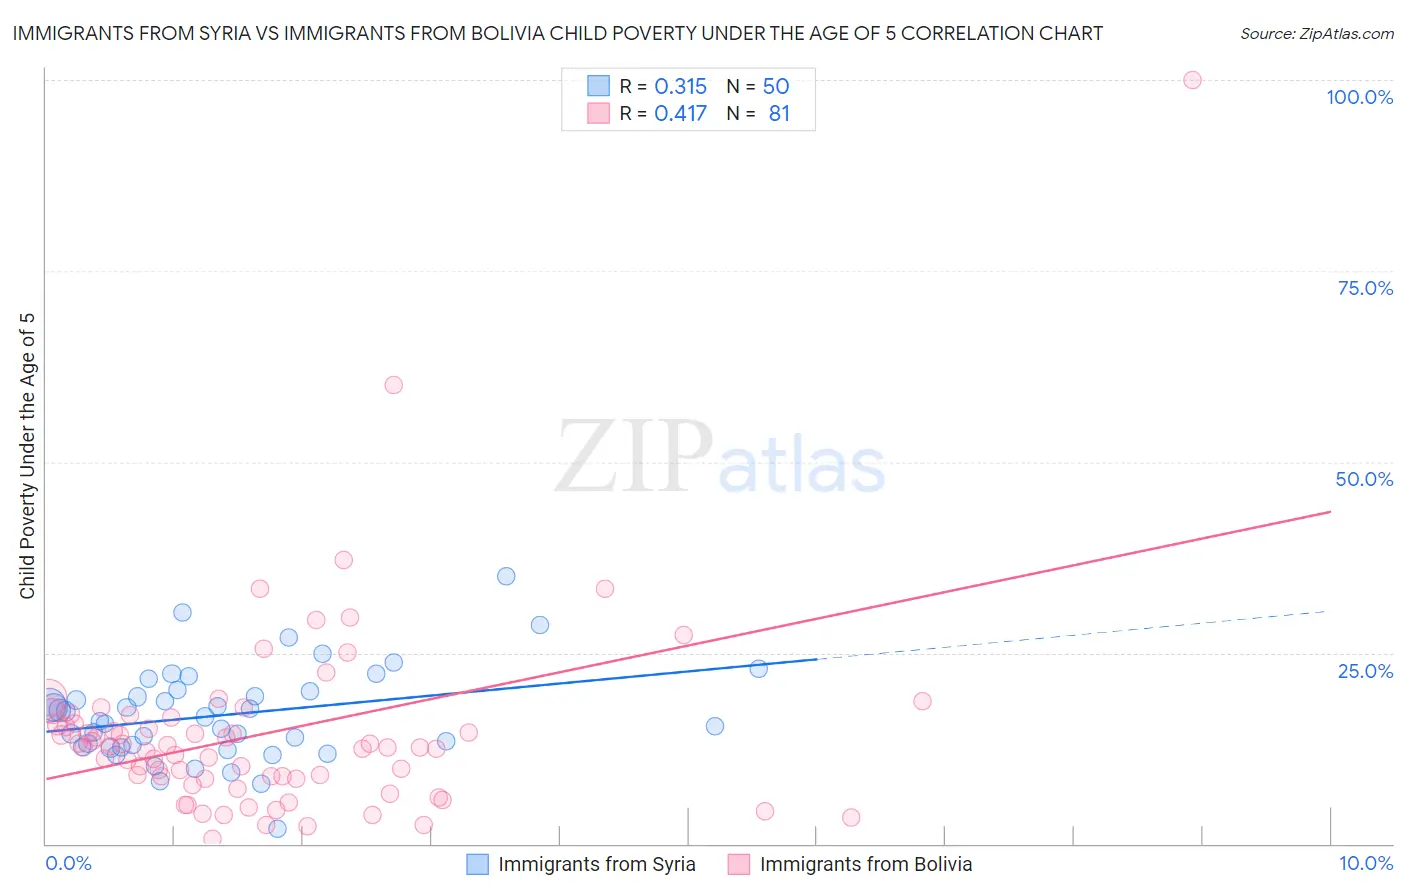 Immigrants from Syria vs Immigrants from Bolivia Child Poverty Under the Age of 5